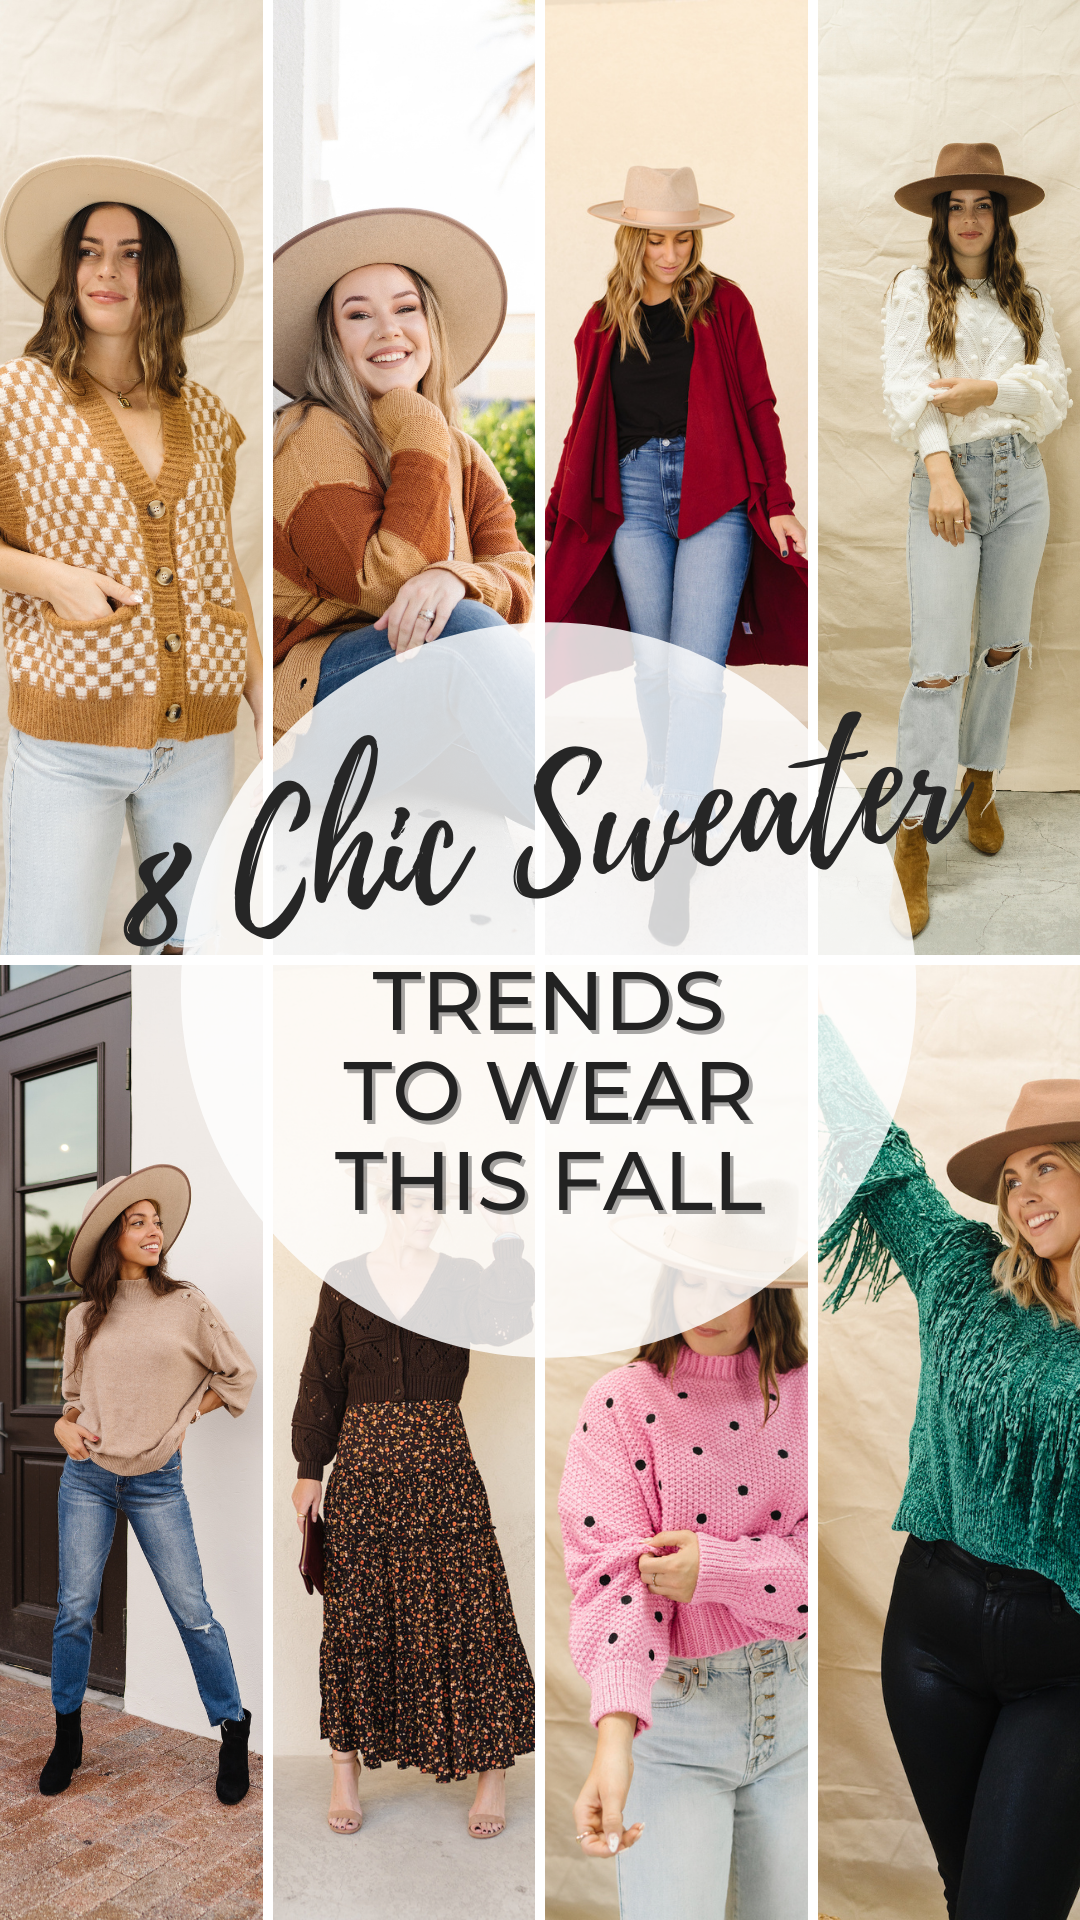 8 Chic Sweater Trends to Wear this Fall